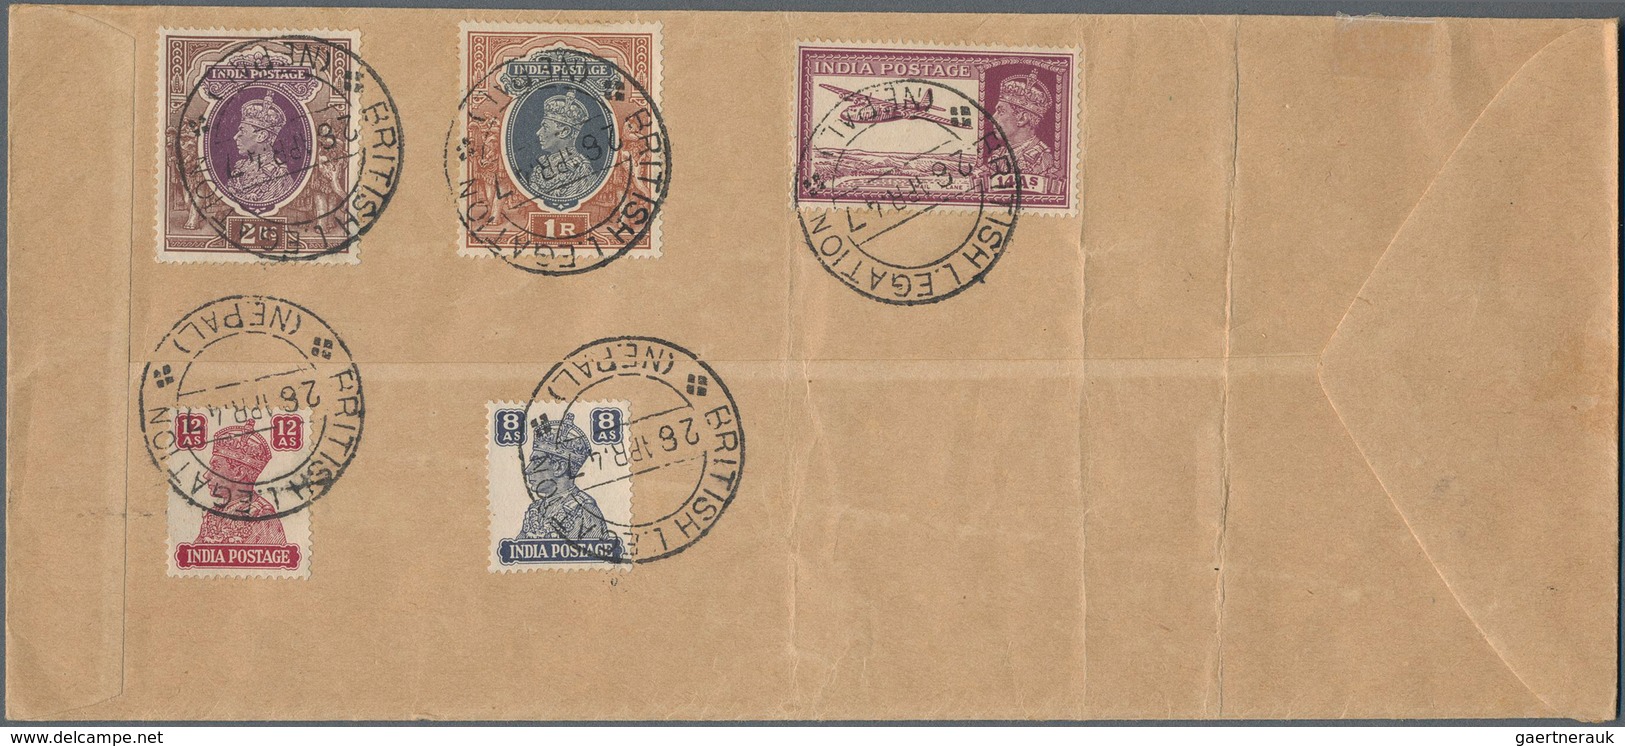 Indien - Used Abroad: NEPAL 1941-50 Four covers from Nepal to India, Ceylon and England, with 1) 194